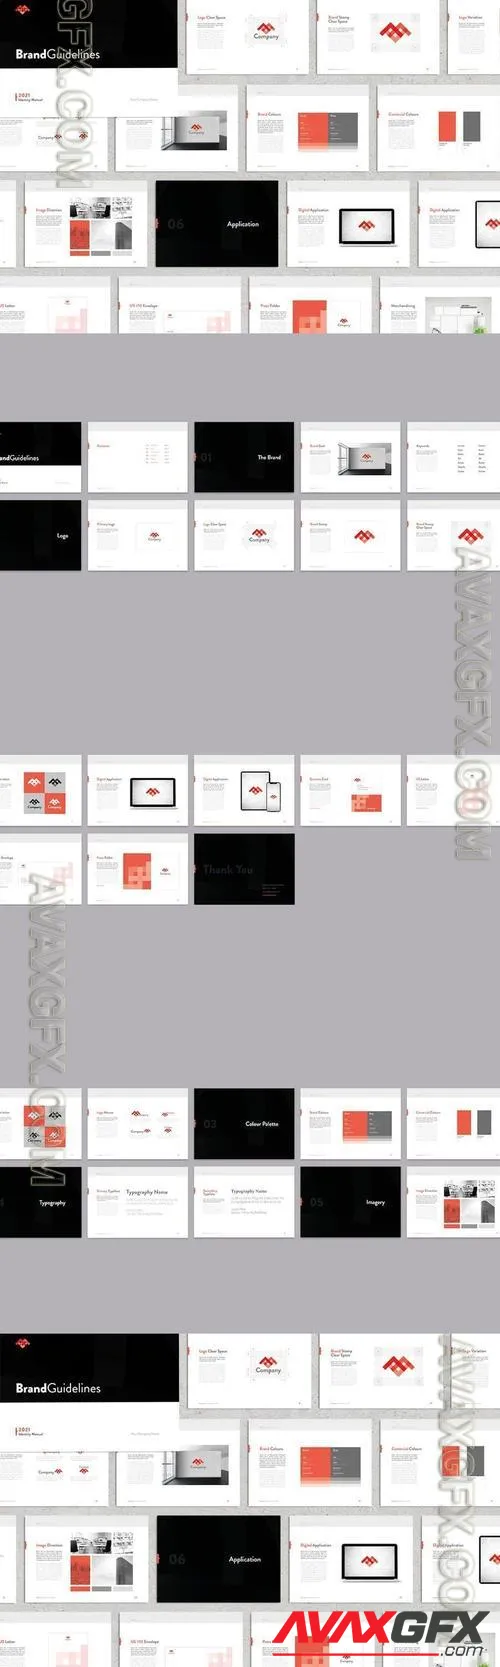 Brand Guidelines Black and Red Layout